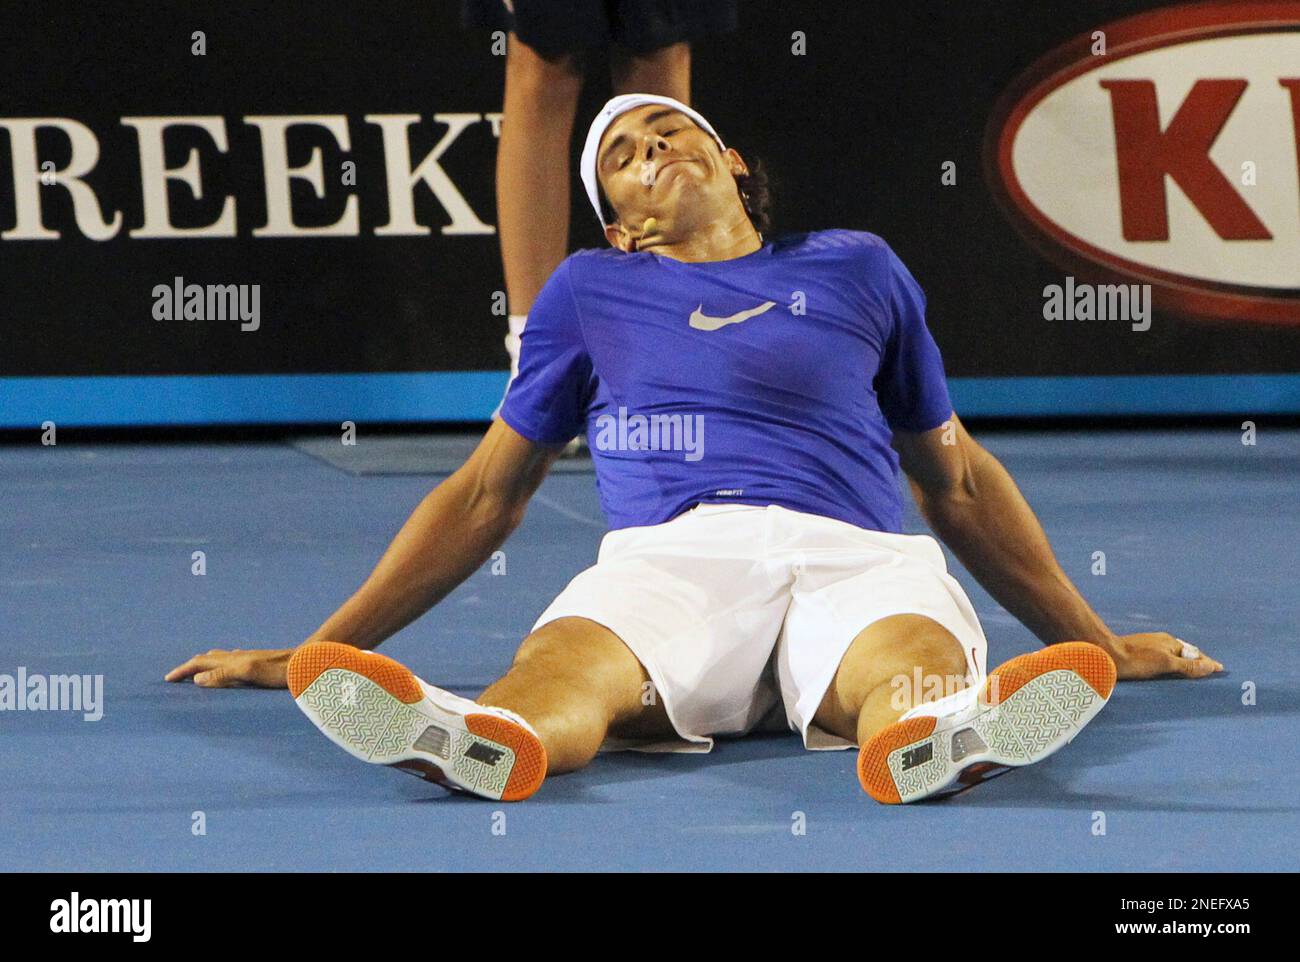 Rafael Nadal of Spain sits on the court during an exhibition tennis match  in Melbourne, Australia, Sunday Jan. 17, 2010. A series of exhibition games  were set up by Roger Federer of